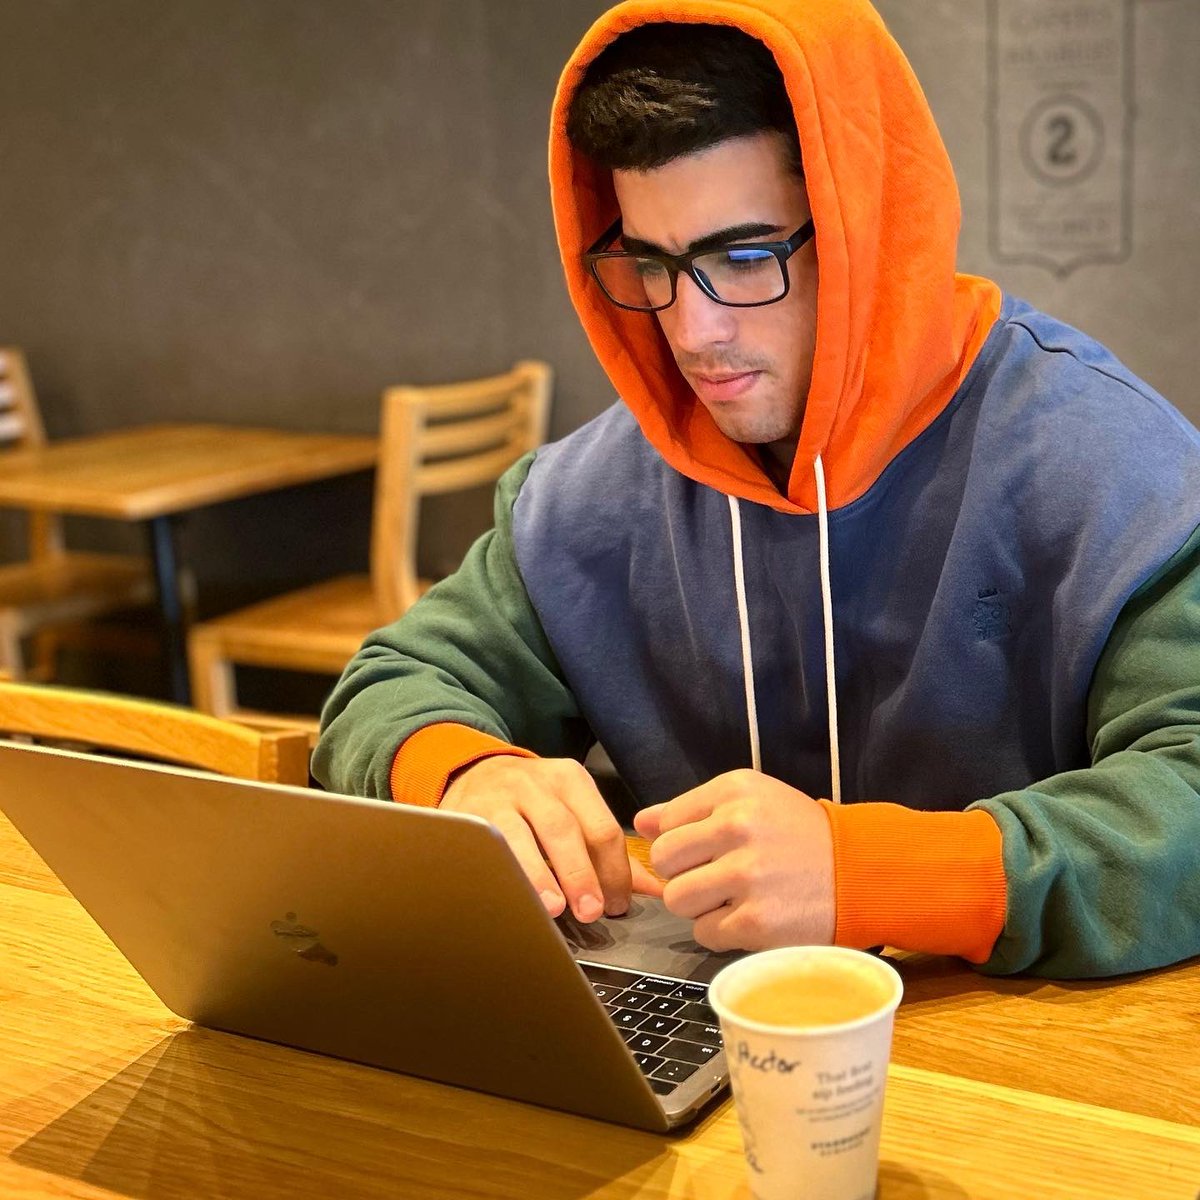 Sunday of PURA productividad 😜

Programing my client’s training for this upcoming week and what better way to do it if not in my cozy @KaijuKingz OBG hoodie.

#StayFocused ☕️